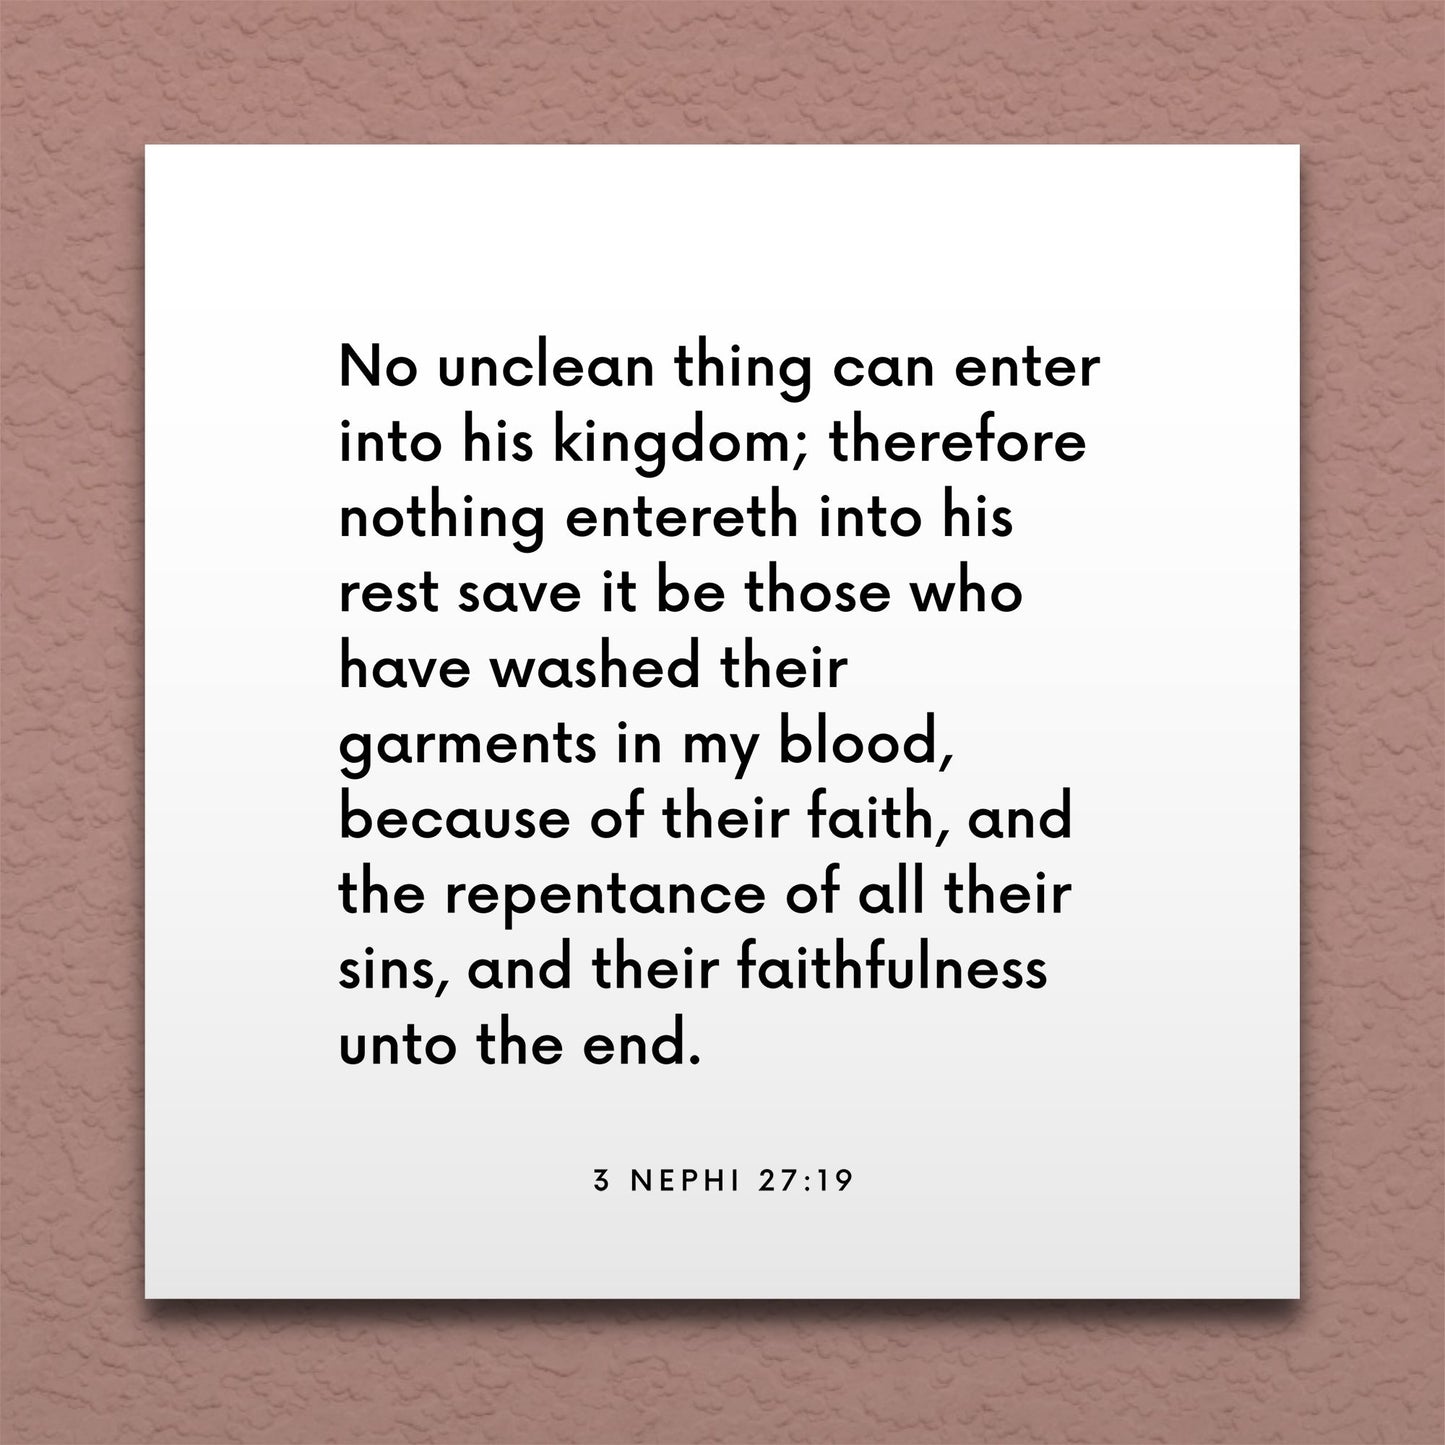 Wall-mounted scripture tile for 3 Nephi 27:19 - "No unclean thing can enter into his kingdom"